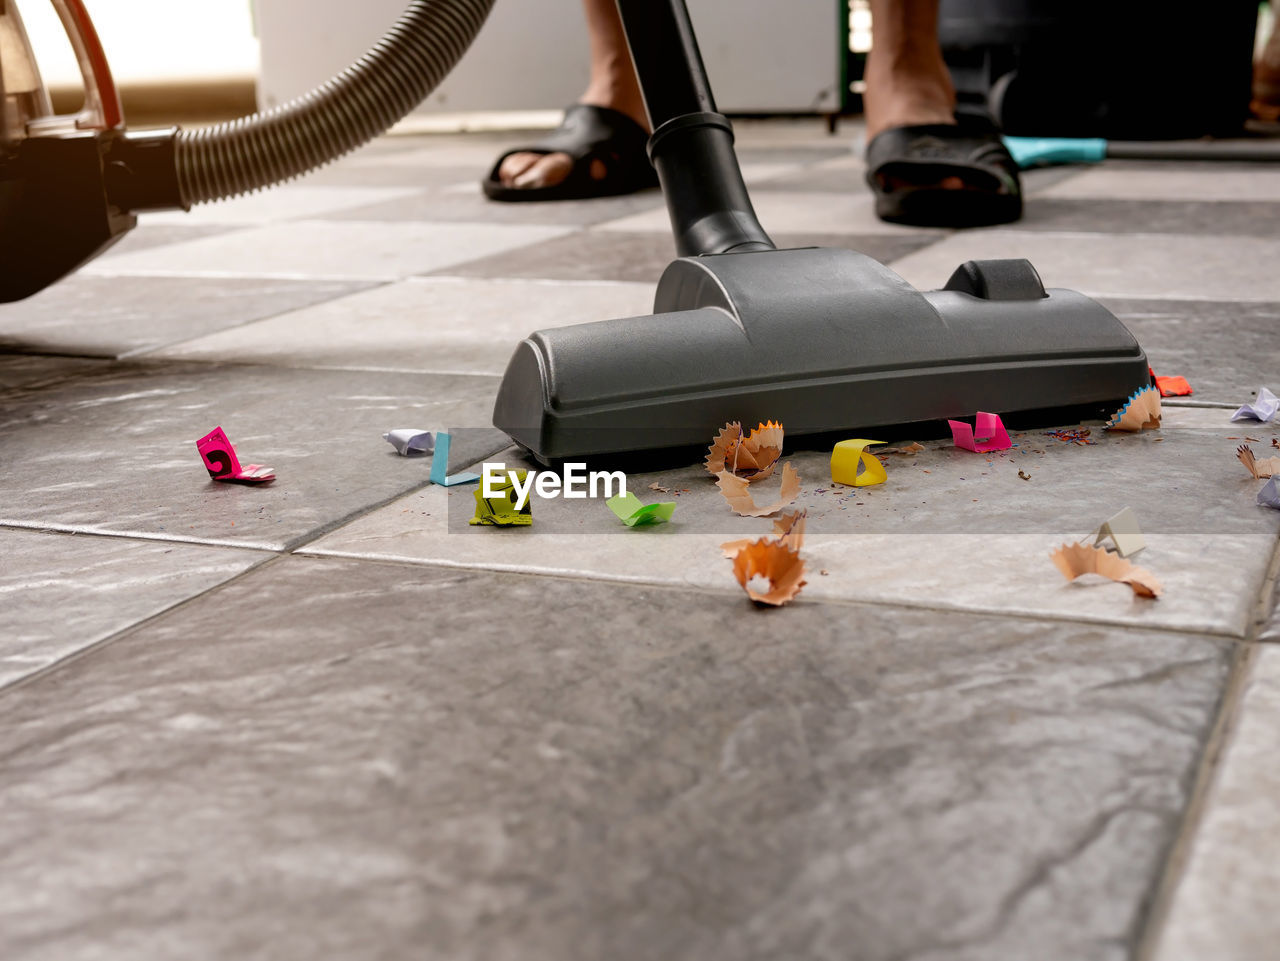 Sweep up paper scraps and dust on tile floors with a vacuum cleaner.